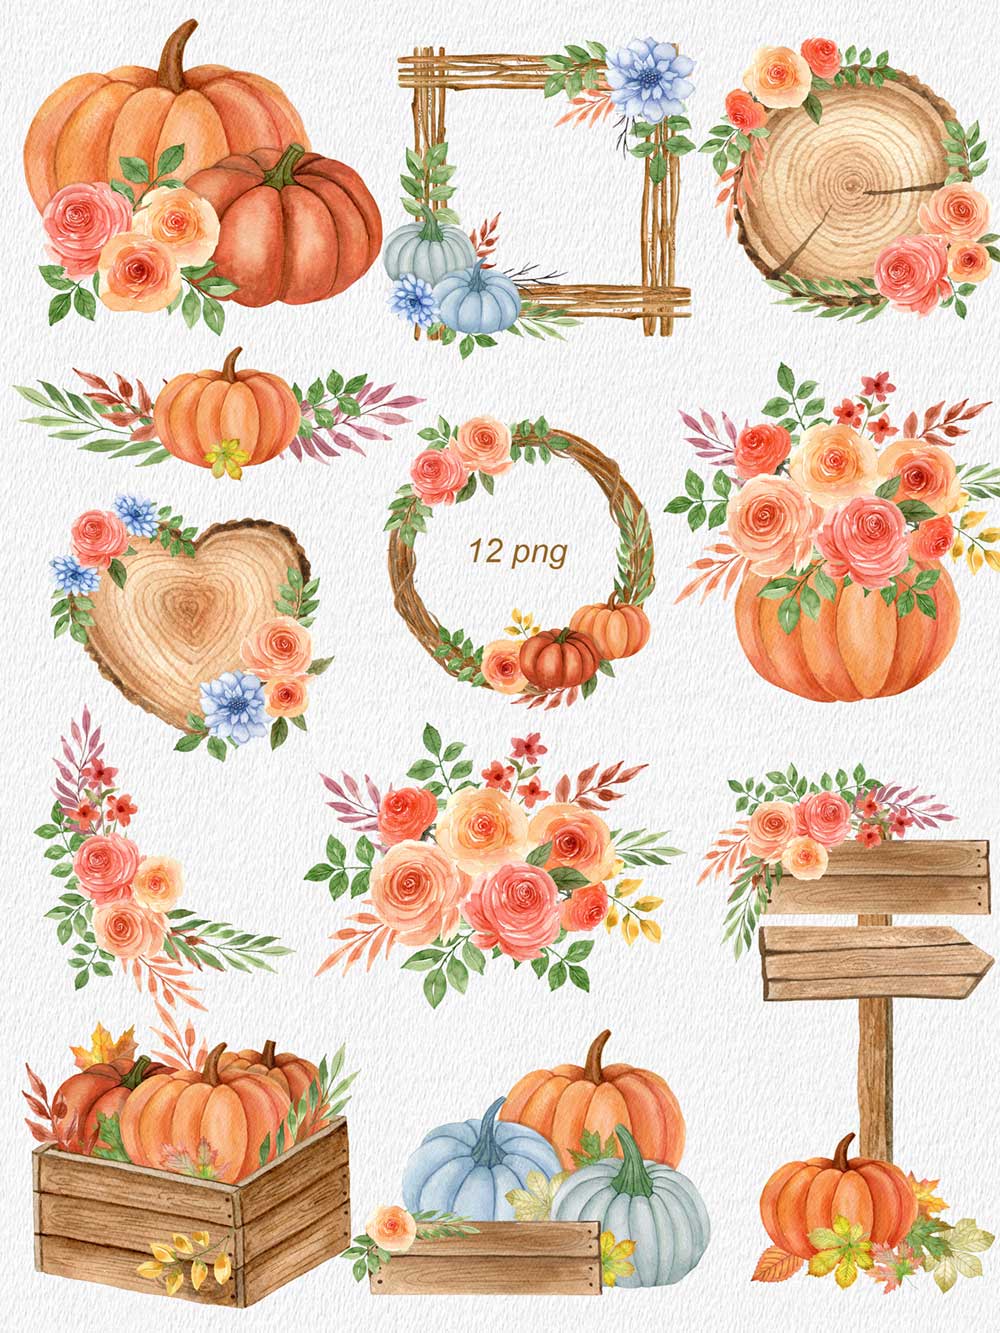 Watercolor Autumn Compositions with Pumpkins and Flowers.